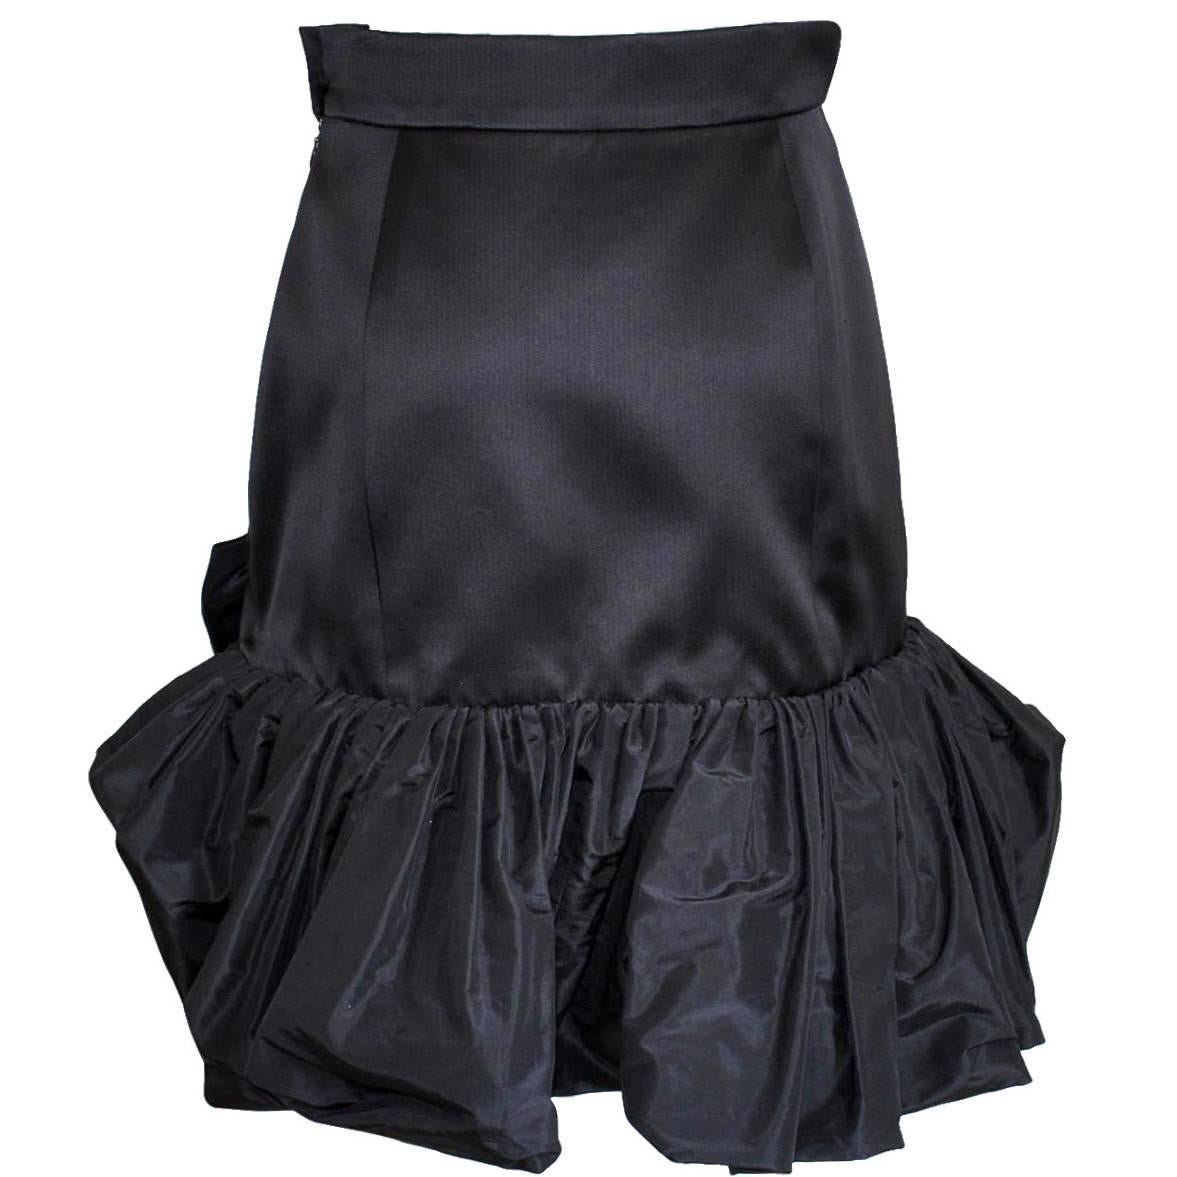 Beautiful skirt by Yves Saint Laurent
Acetate (60%) and silk (40%)
Taffetà
Black color
Lateral bow
Total length cm 56 (22 inches)
French size 40 (italian 44)
Made in France
Worldwide express shipping included in the price !